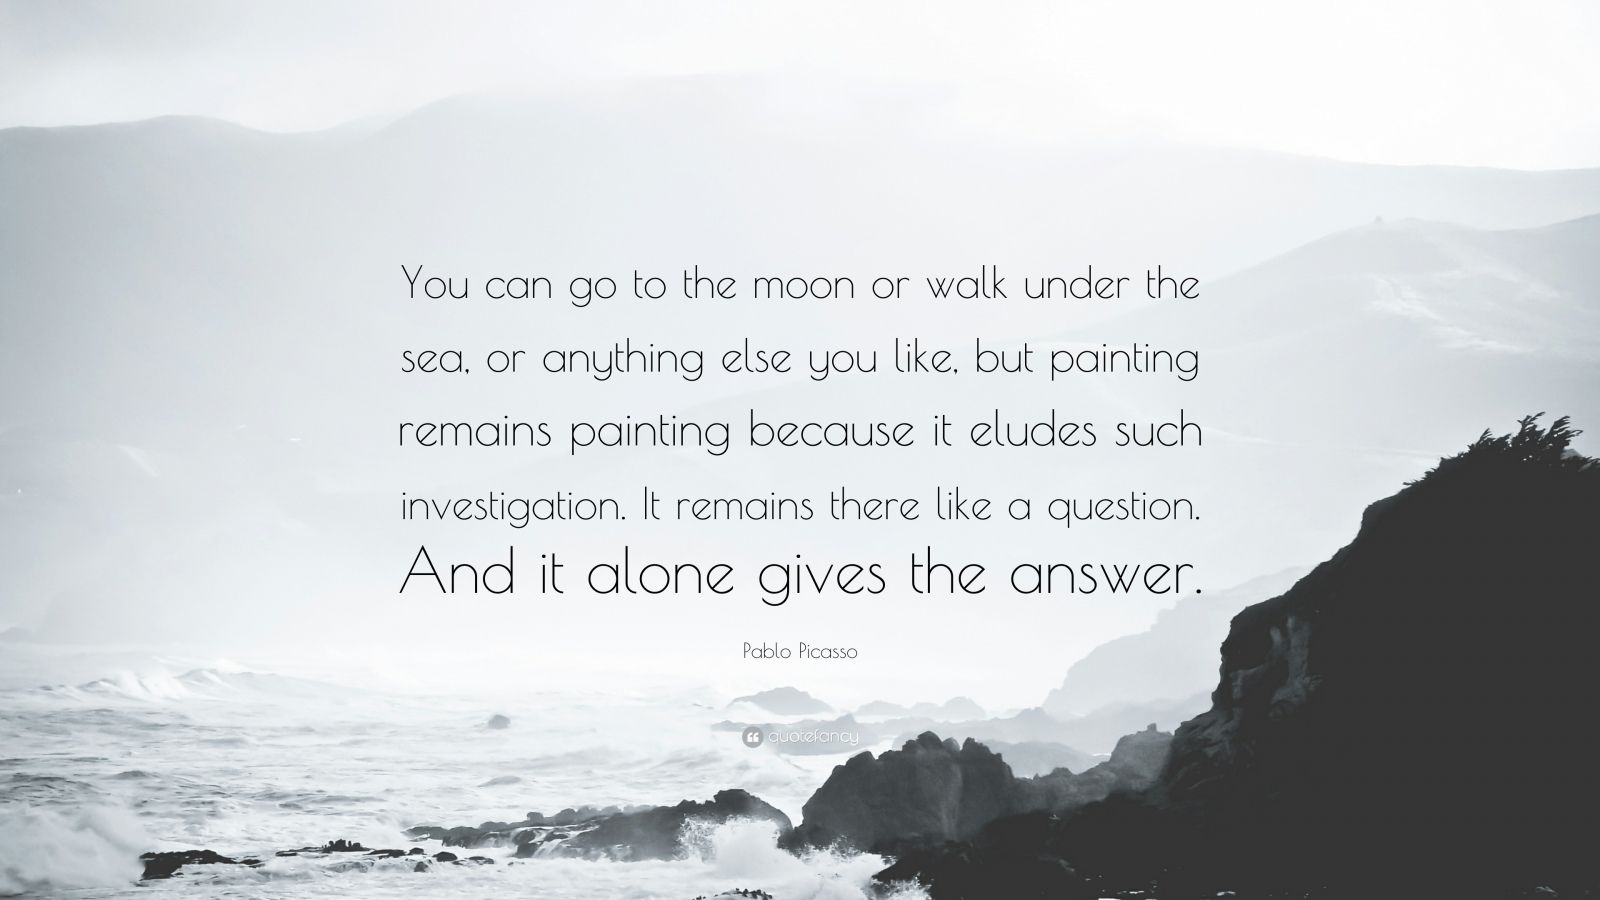 Pablo Picasso Quote You Can Go To The Moon Or Walk Under The Sea Or Anything Else You Like But Painting Remains Painting Because It Eludes